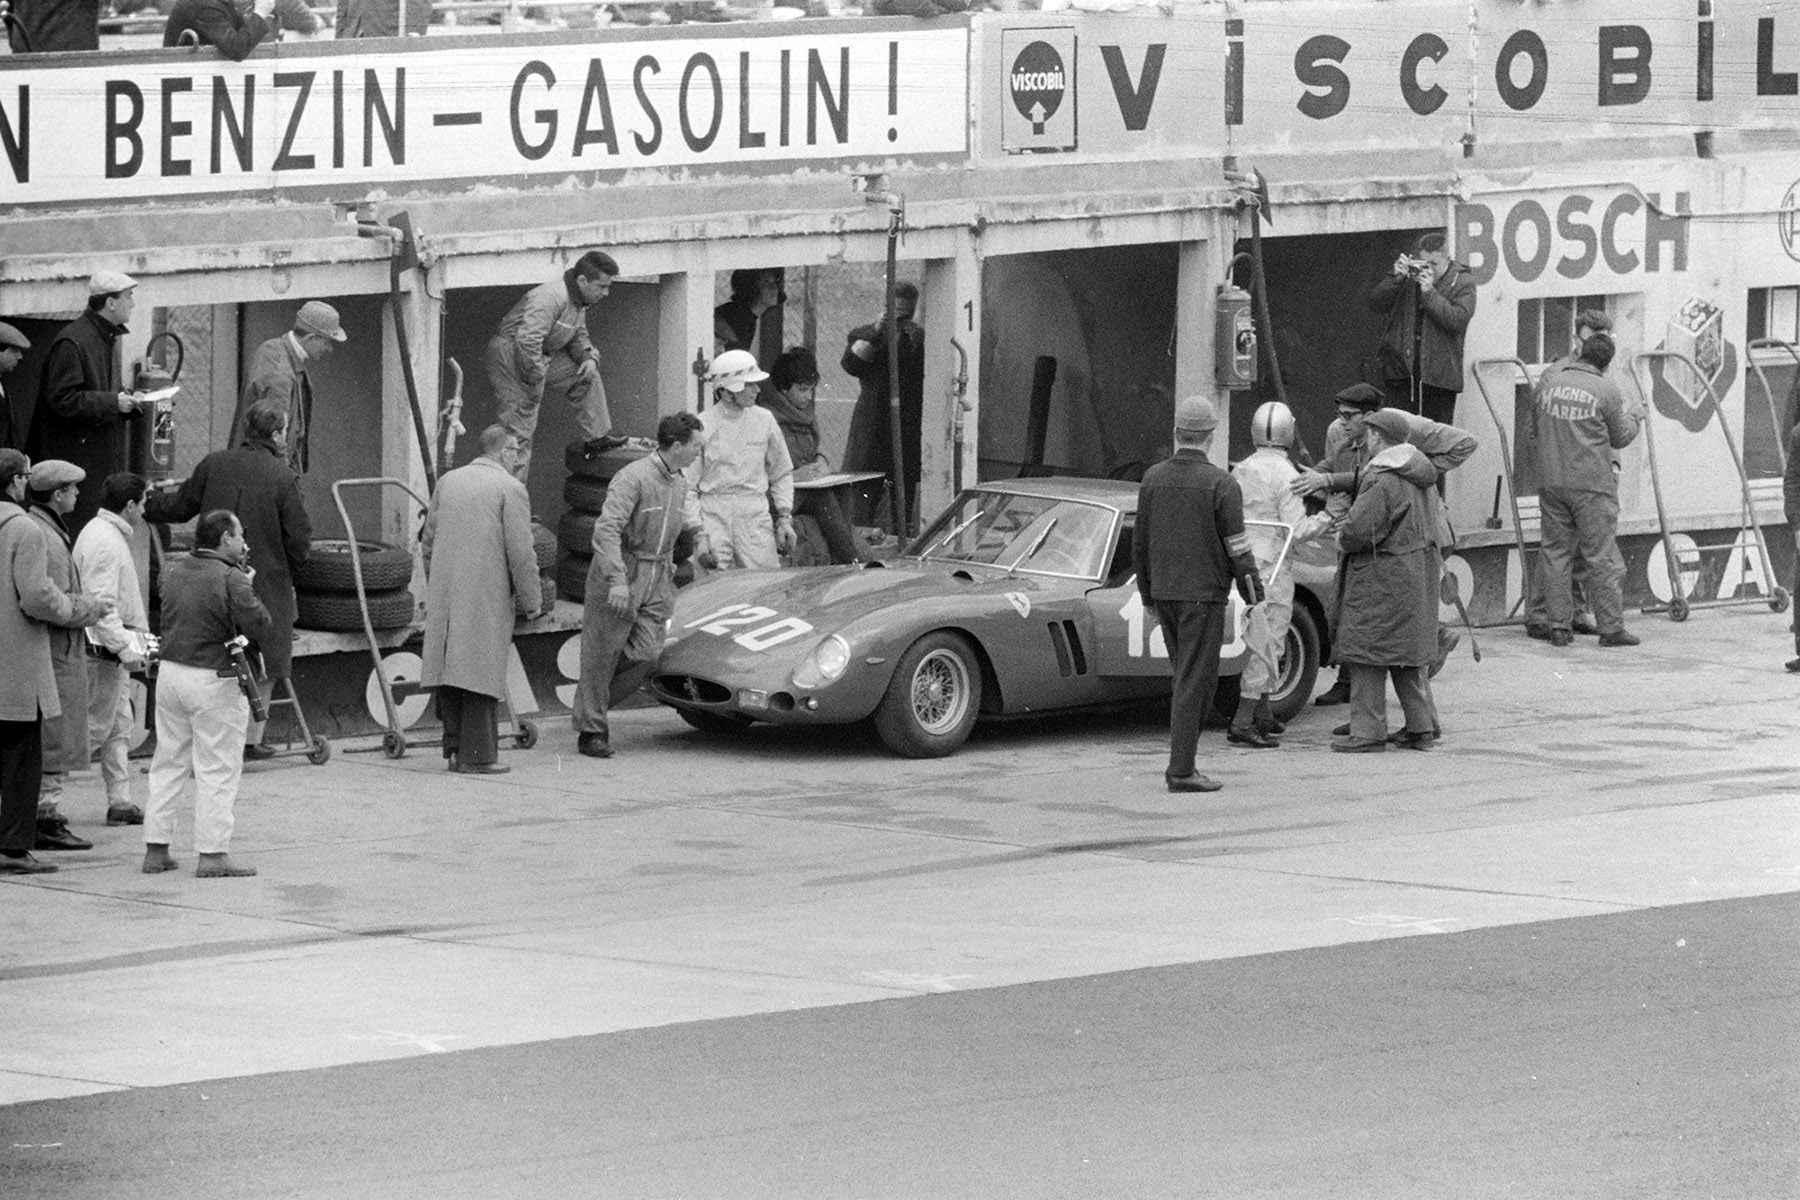 Chassis no. 3765, race #120, in pit lane during the Nürburgring 1000 kms at Nürburgring on 27 May 1962.